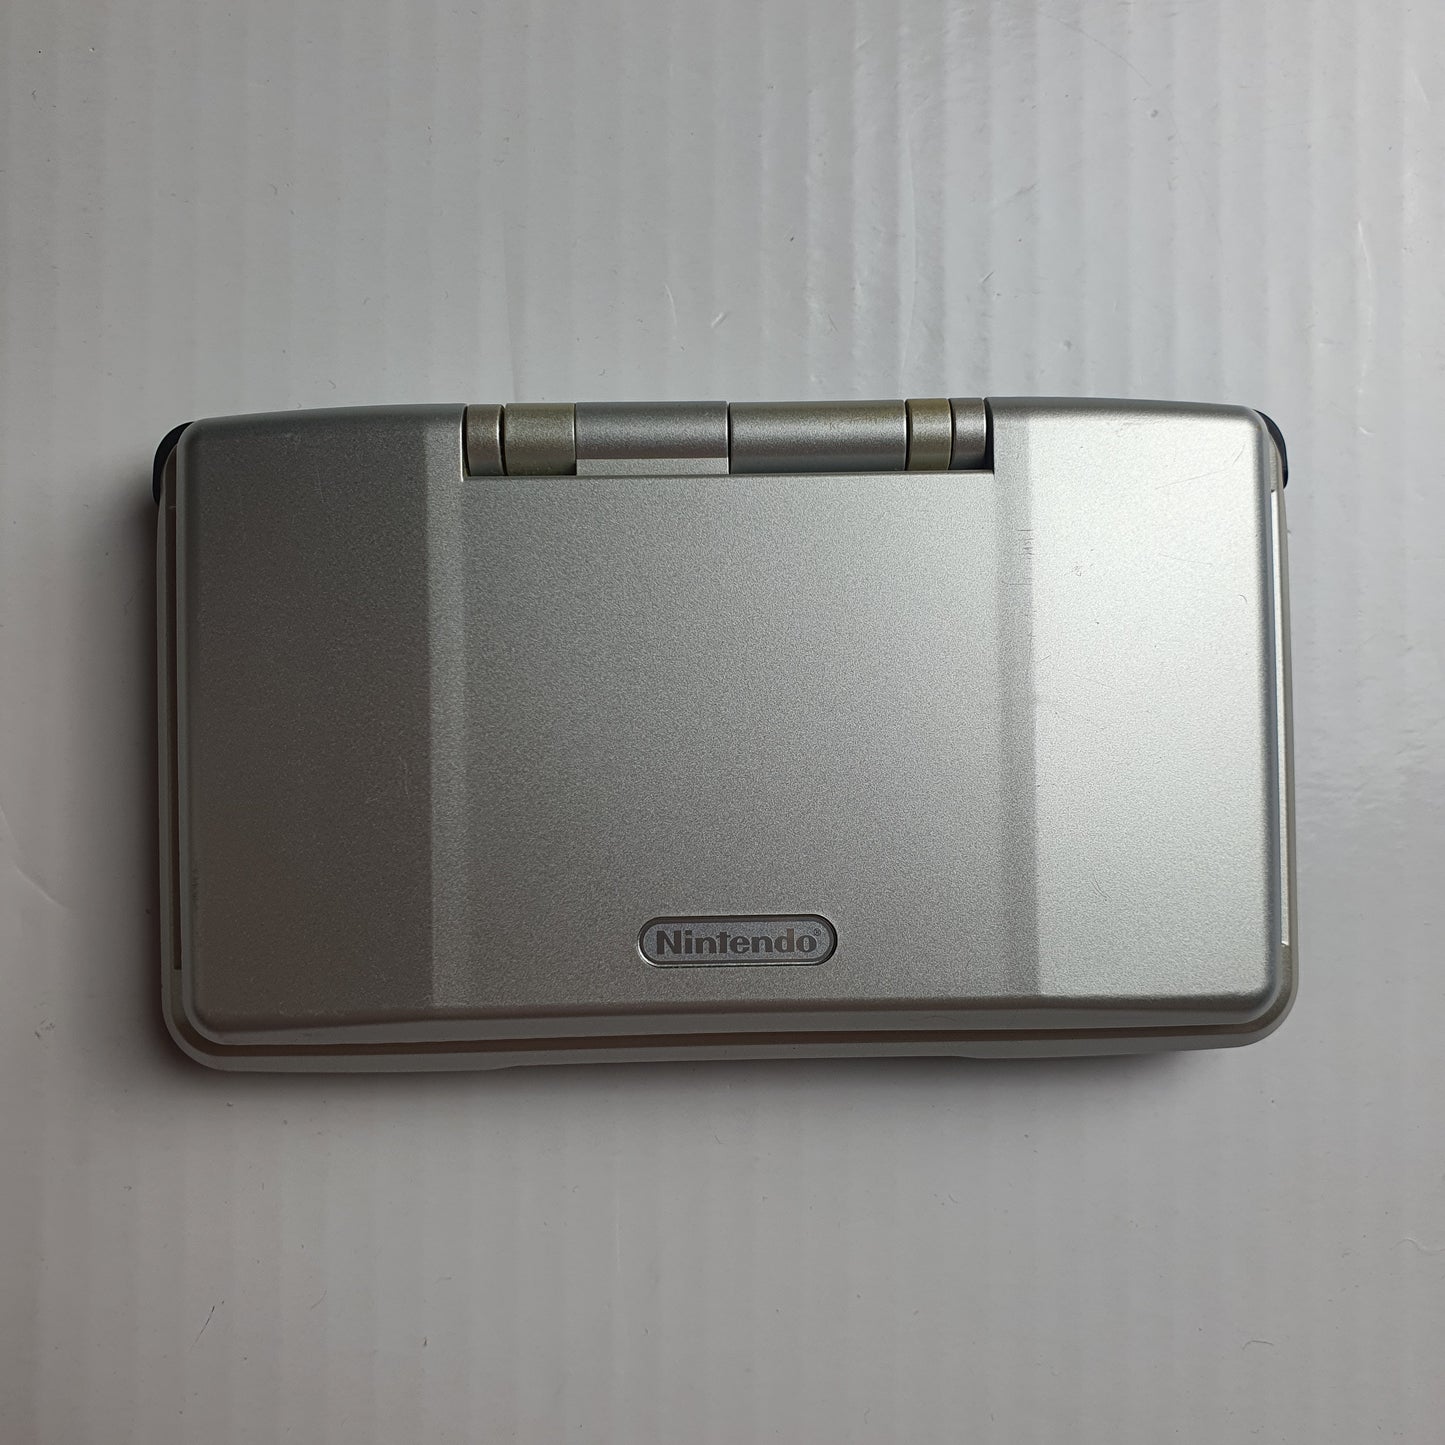 Nintendo DS Console w/ Stylus and Power Supply